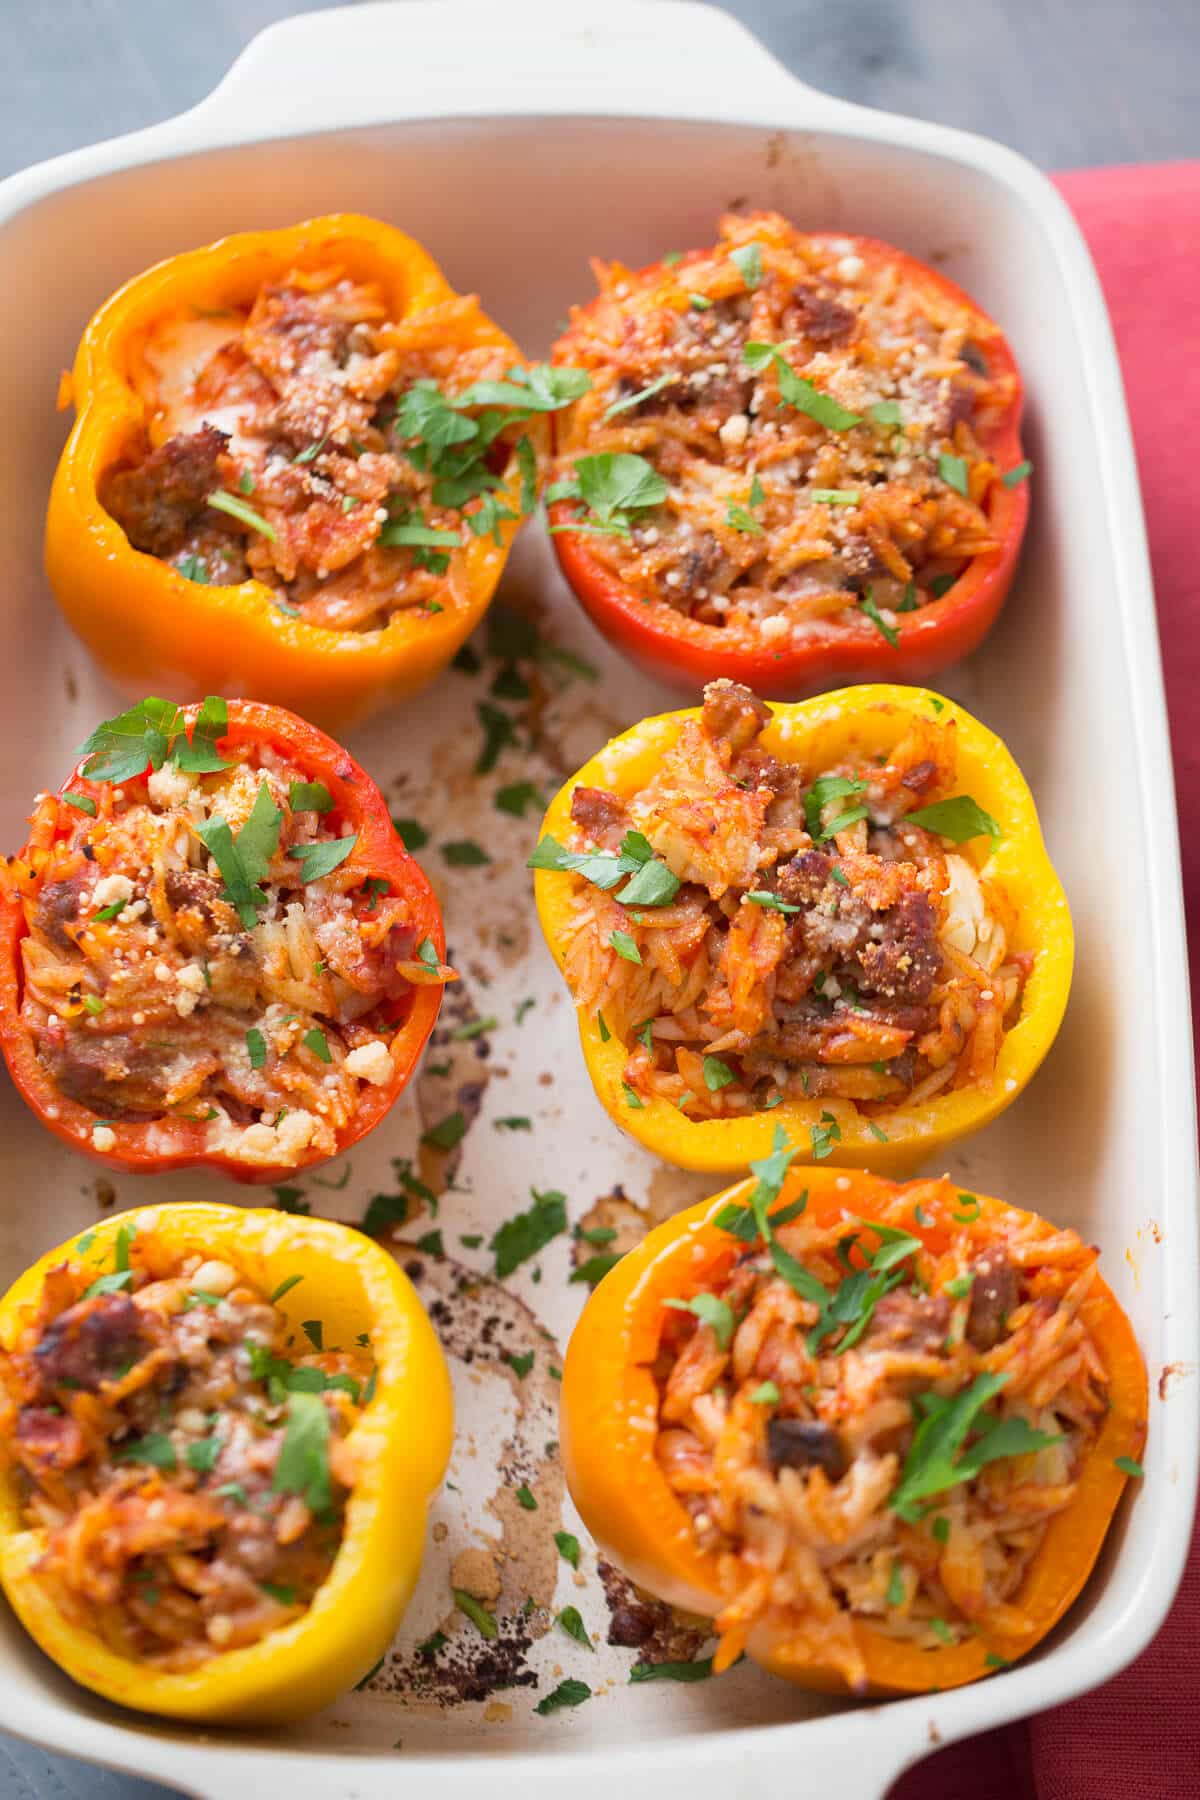 These Italian stuffed peppers are filled with sausage and orzo! Your family is going to love this tasty recipe!